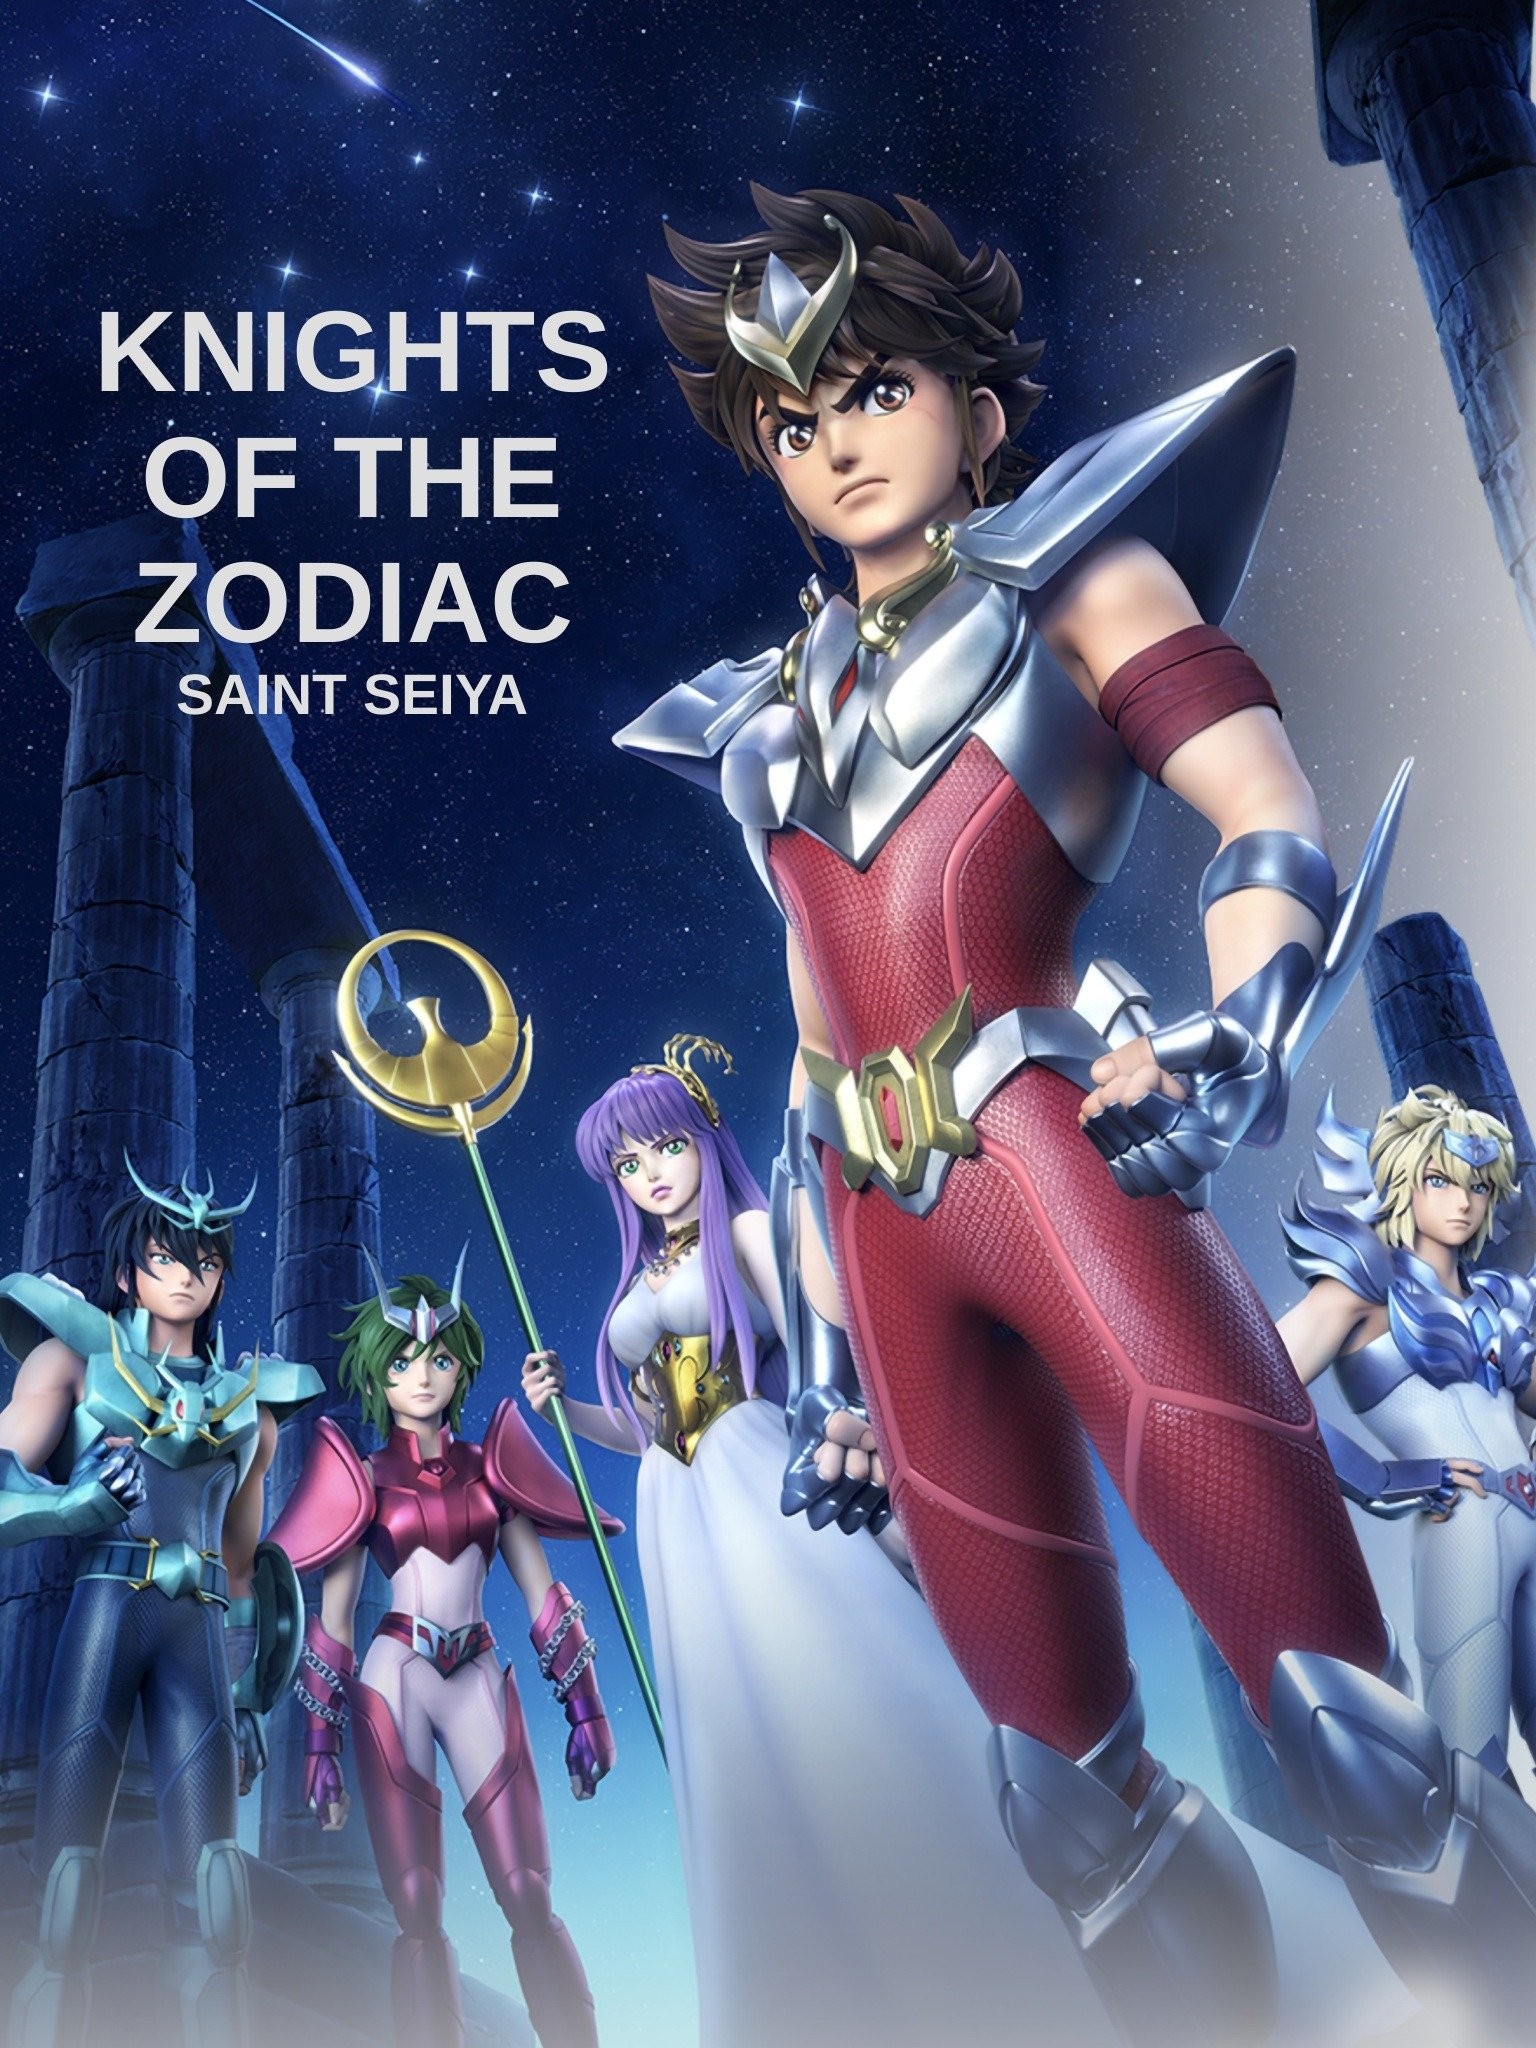 Knights of the Zodiac - Rotten Tomatoes